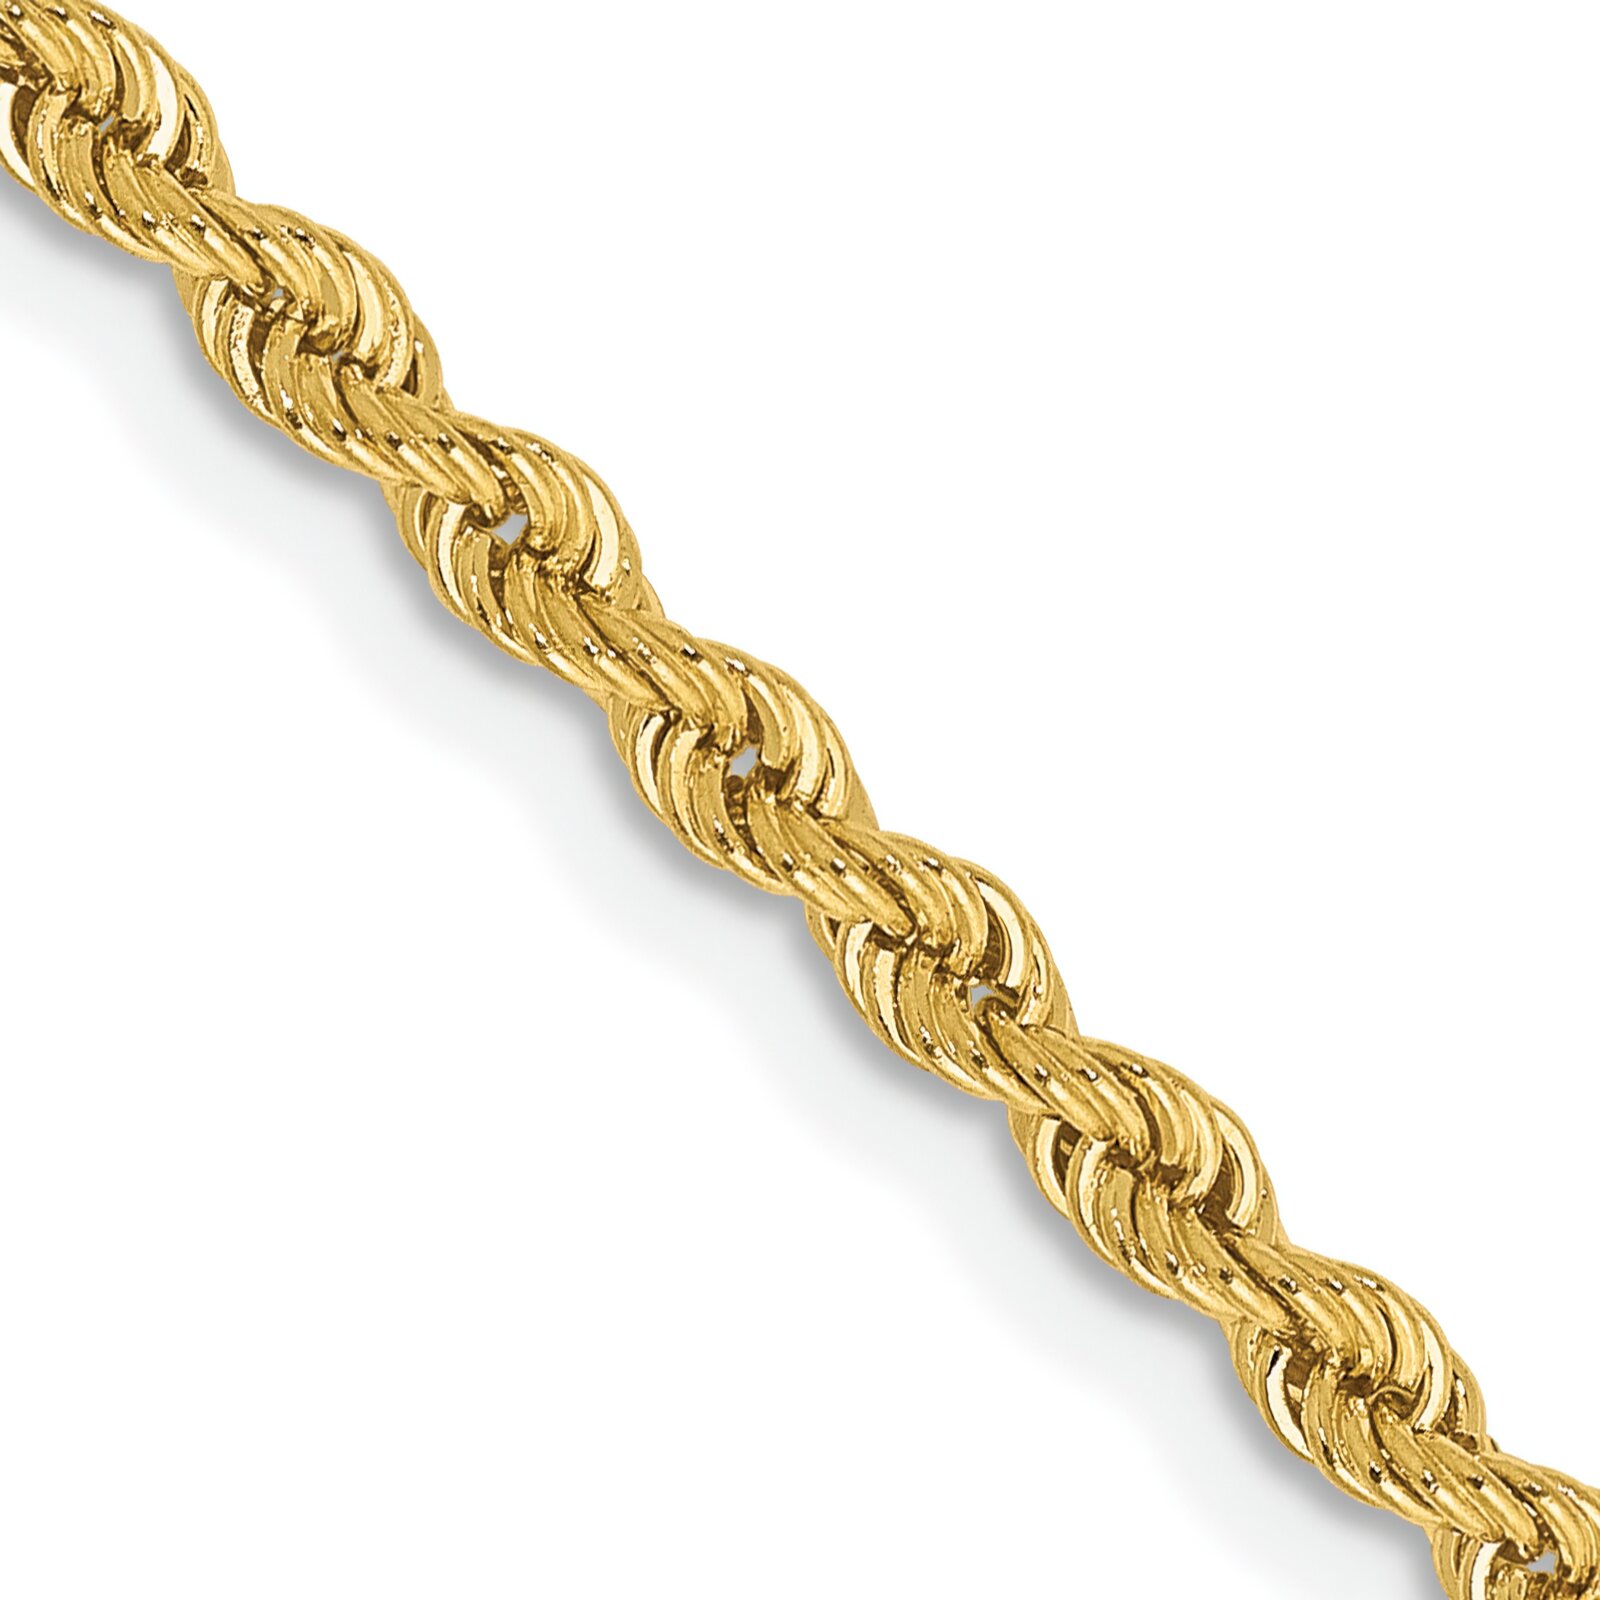 Findingking 14K Yellow Gold 2.5mm Rope Chain Necklace Jewelry 18"